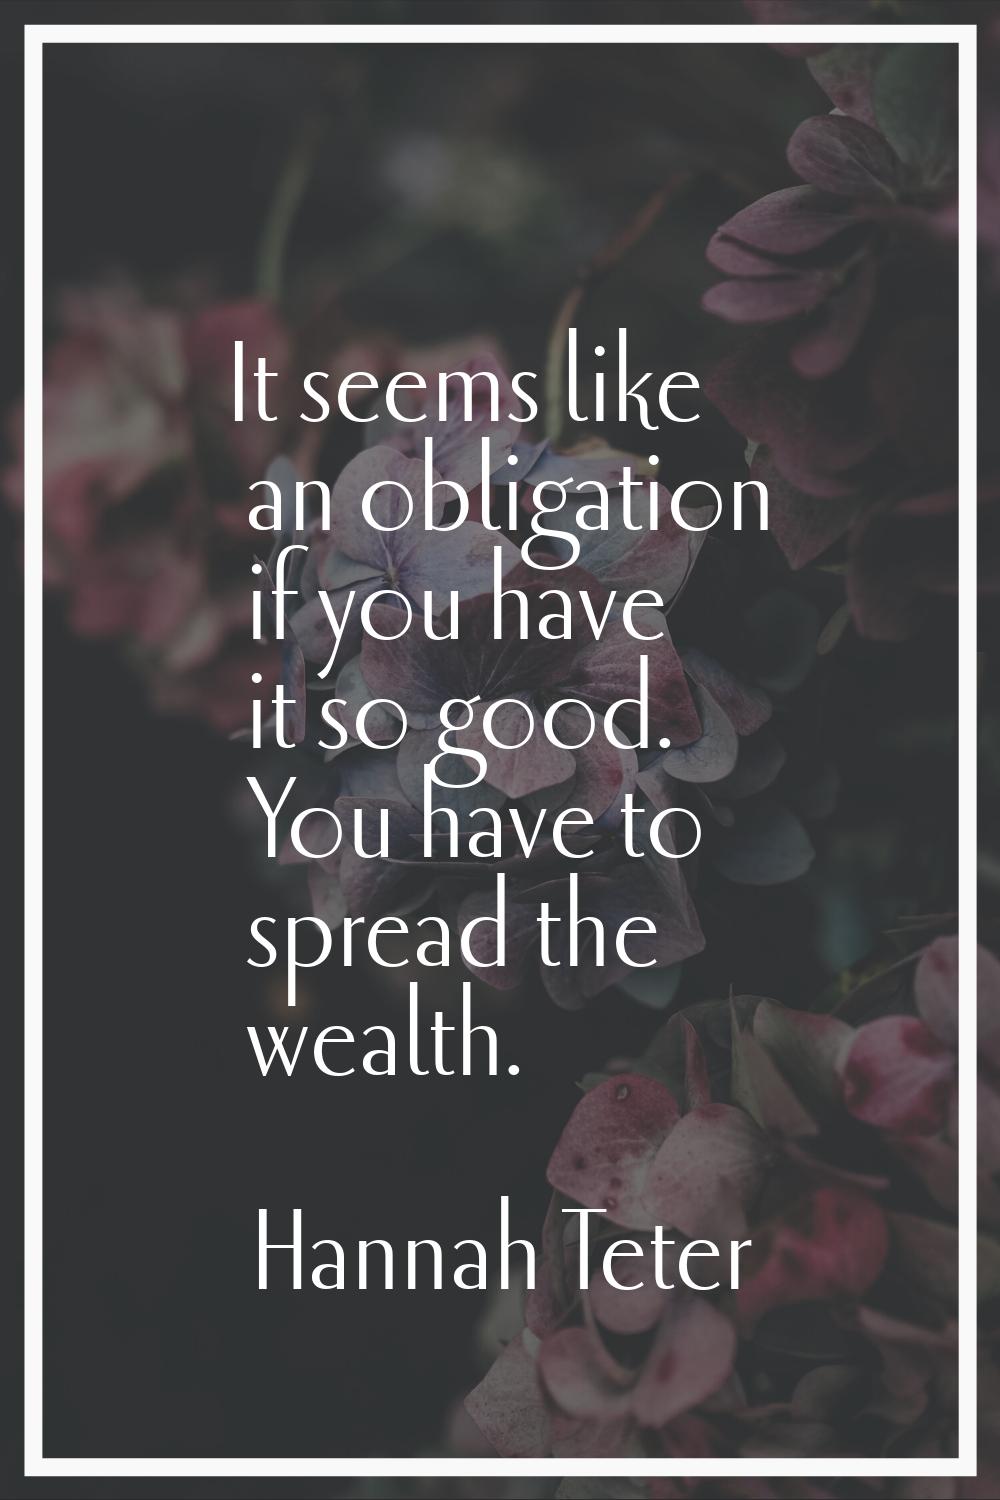 It seems like an obligation if you have it so good. You have to spread the wealth.